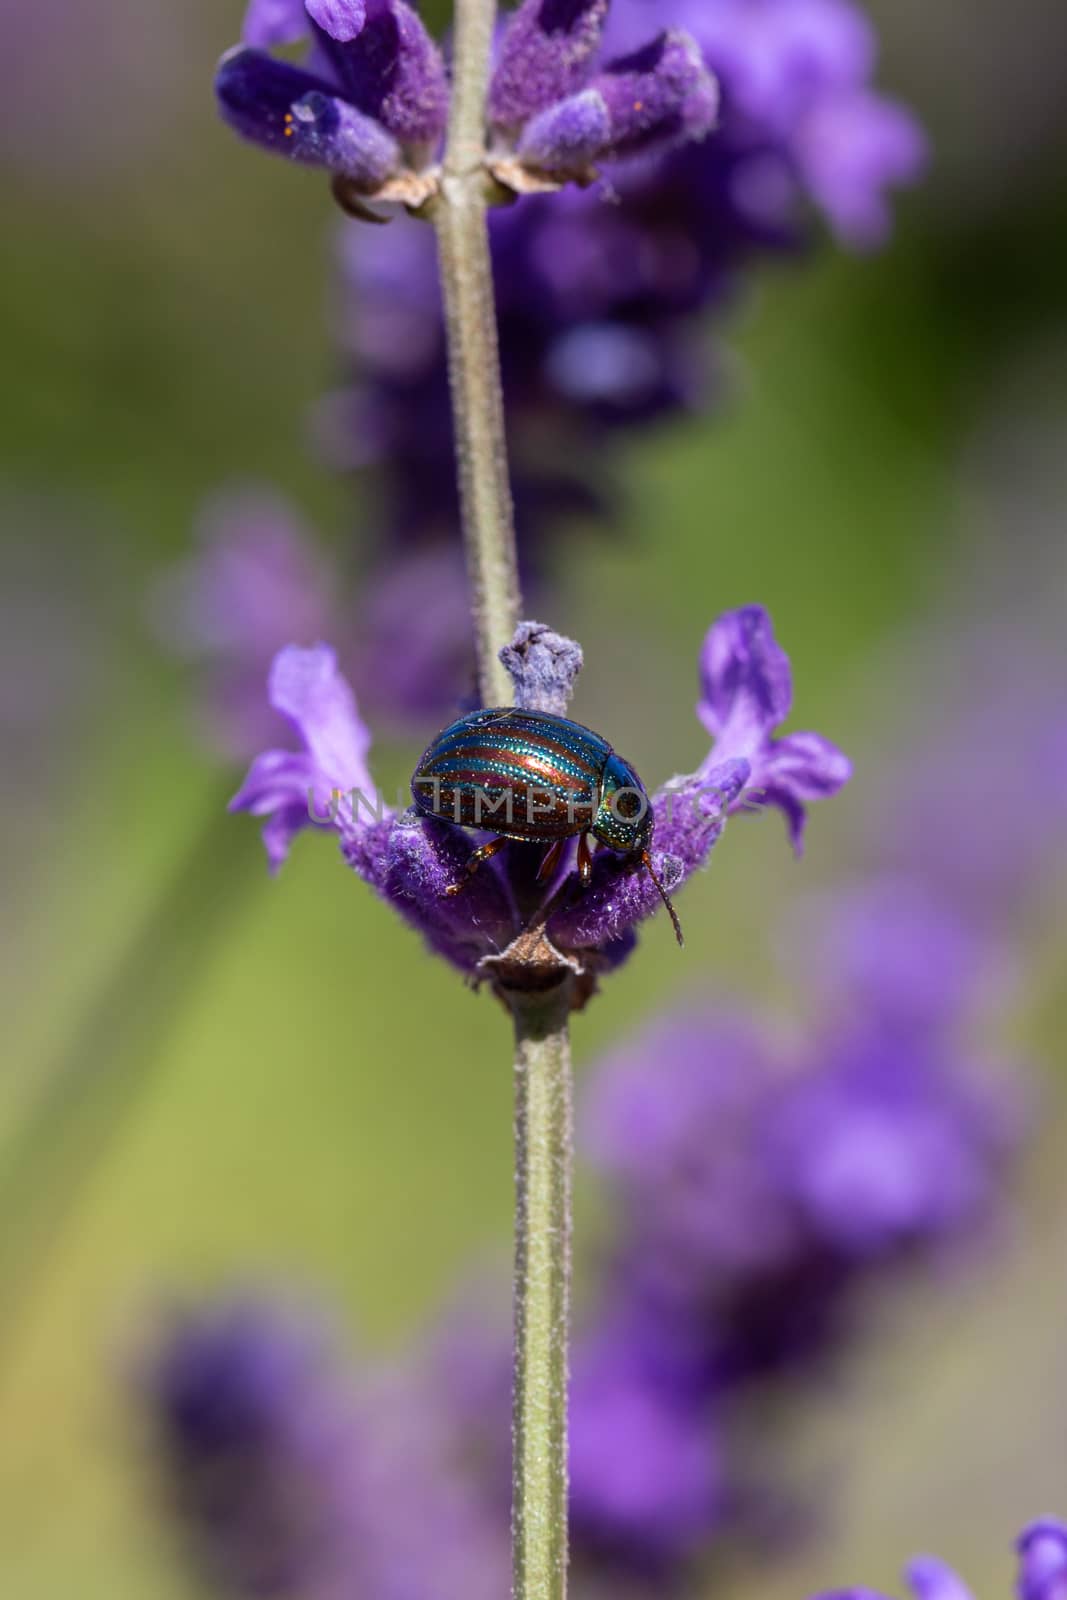 Rosemary Beetle on a lavender plant by magicbones